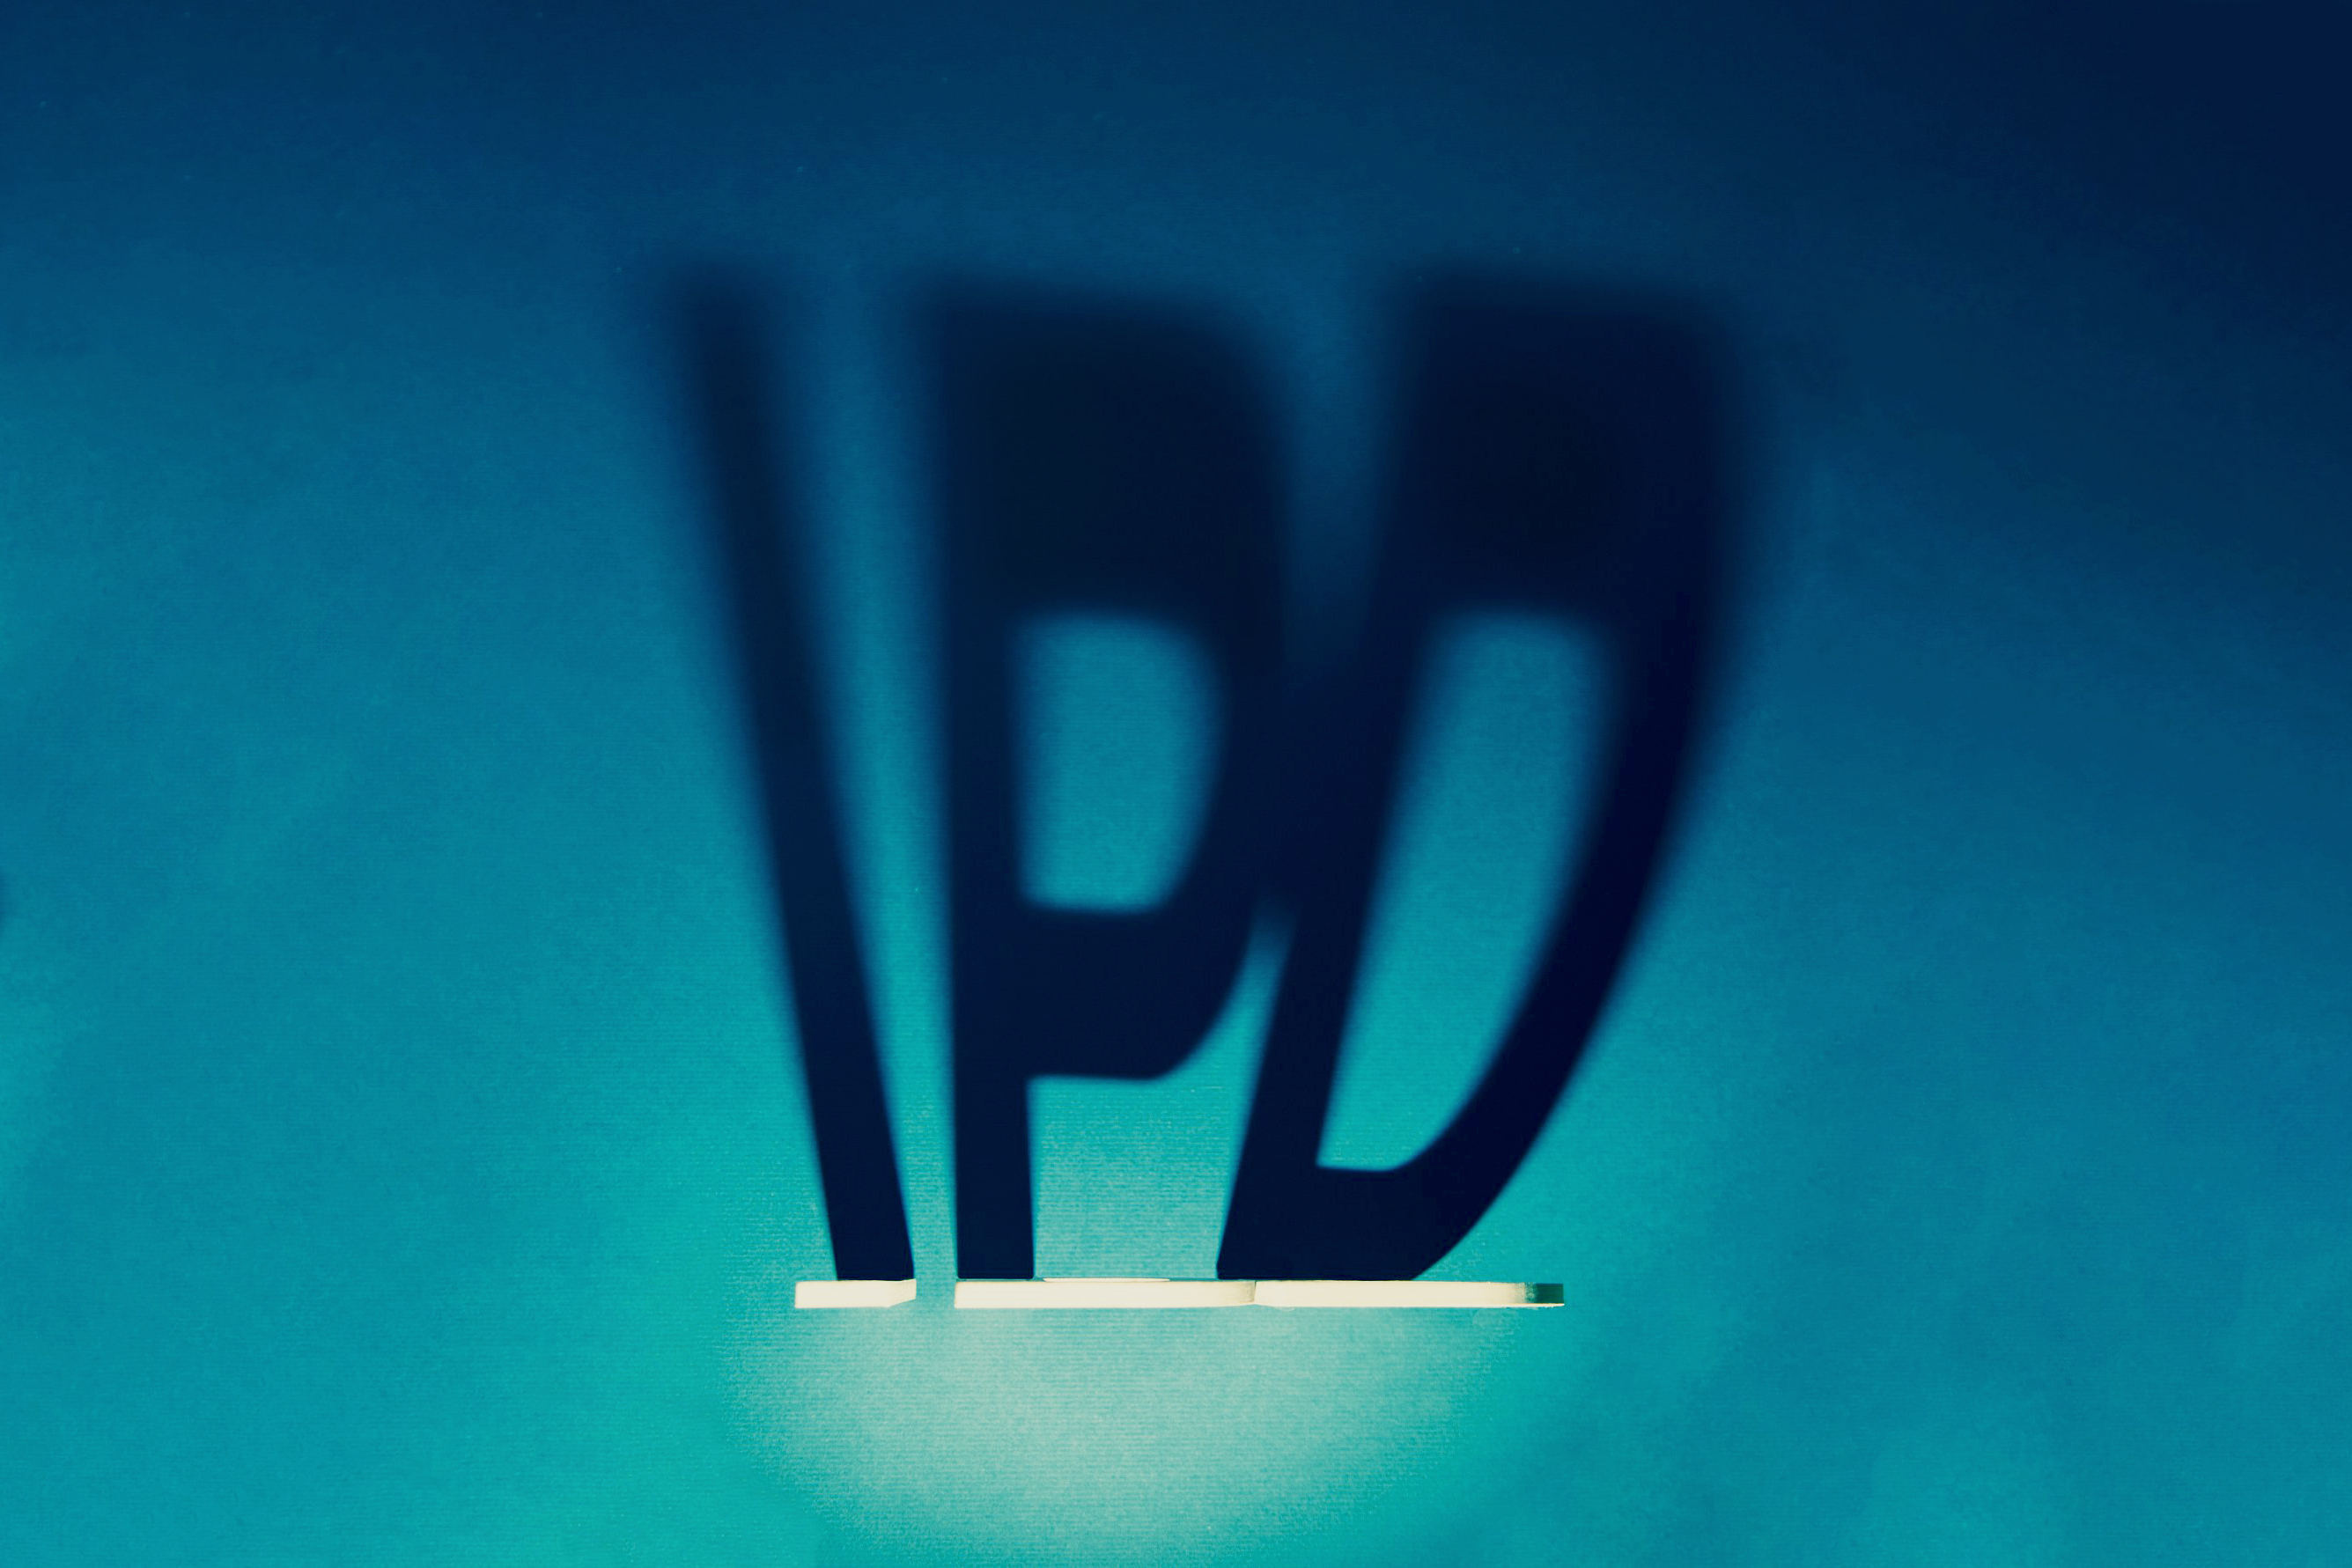 ipd_blue_shadow